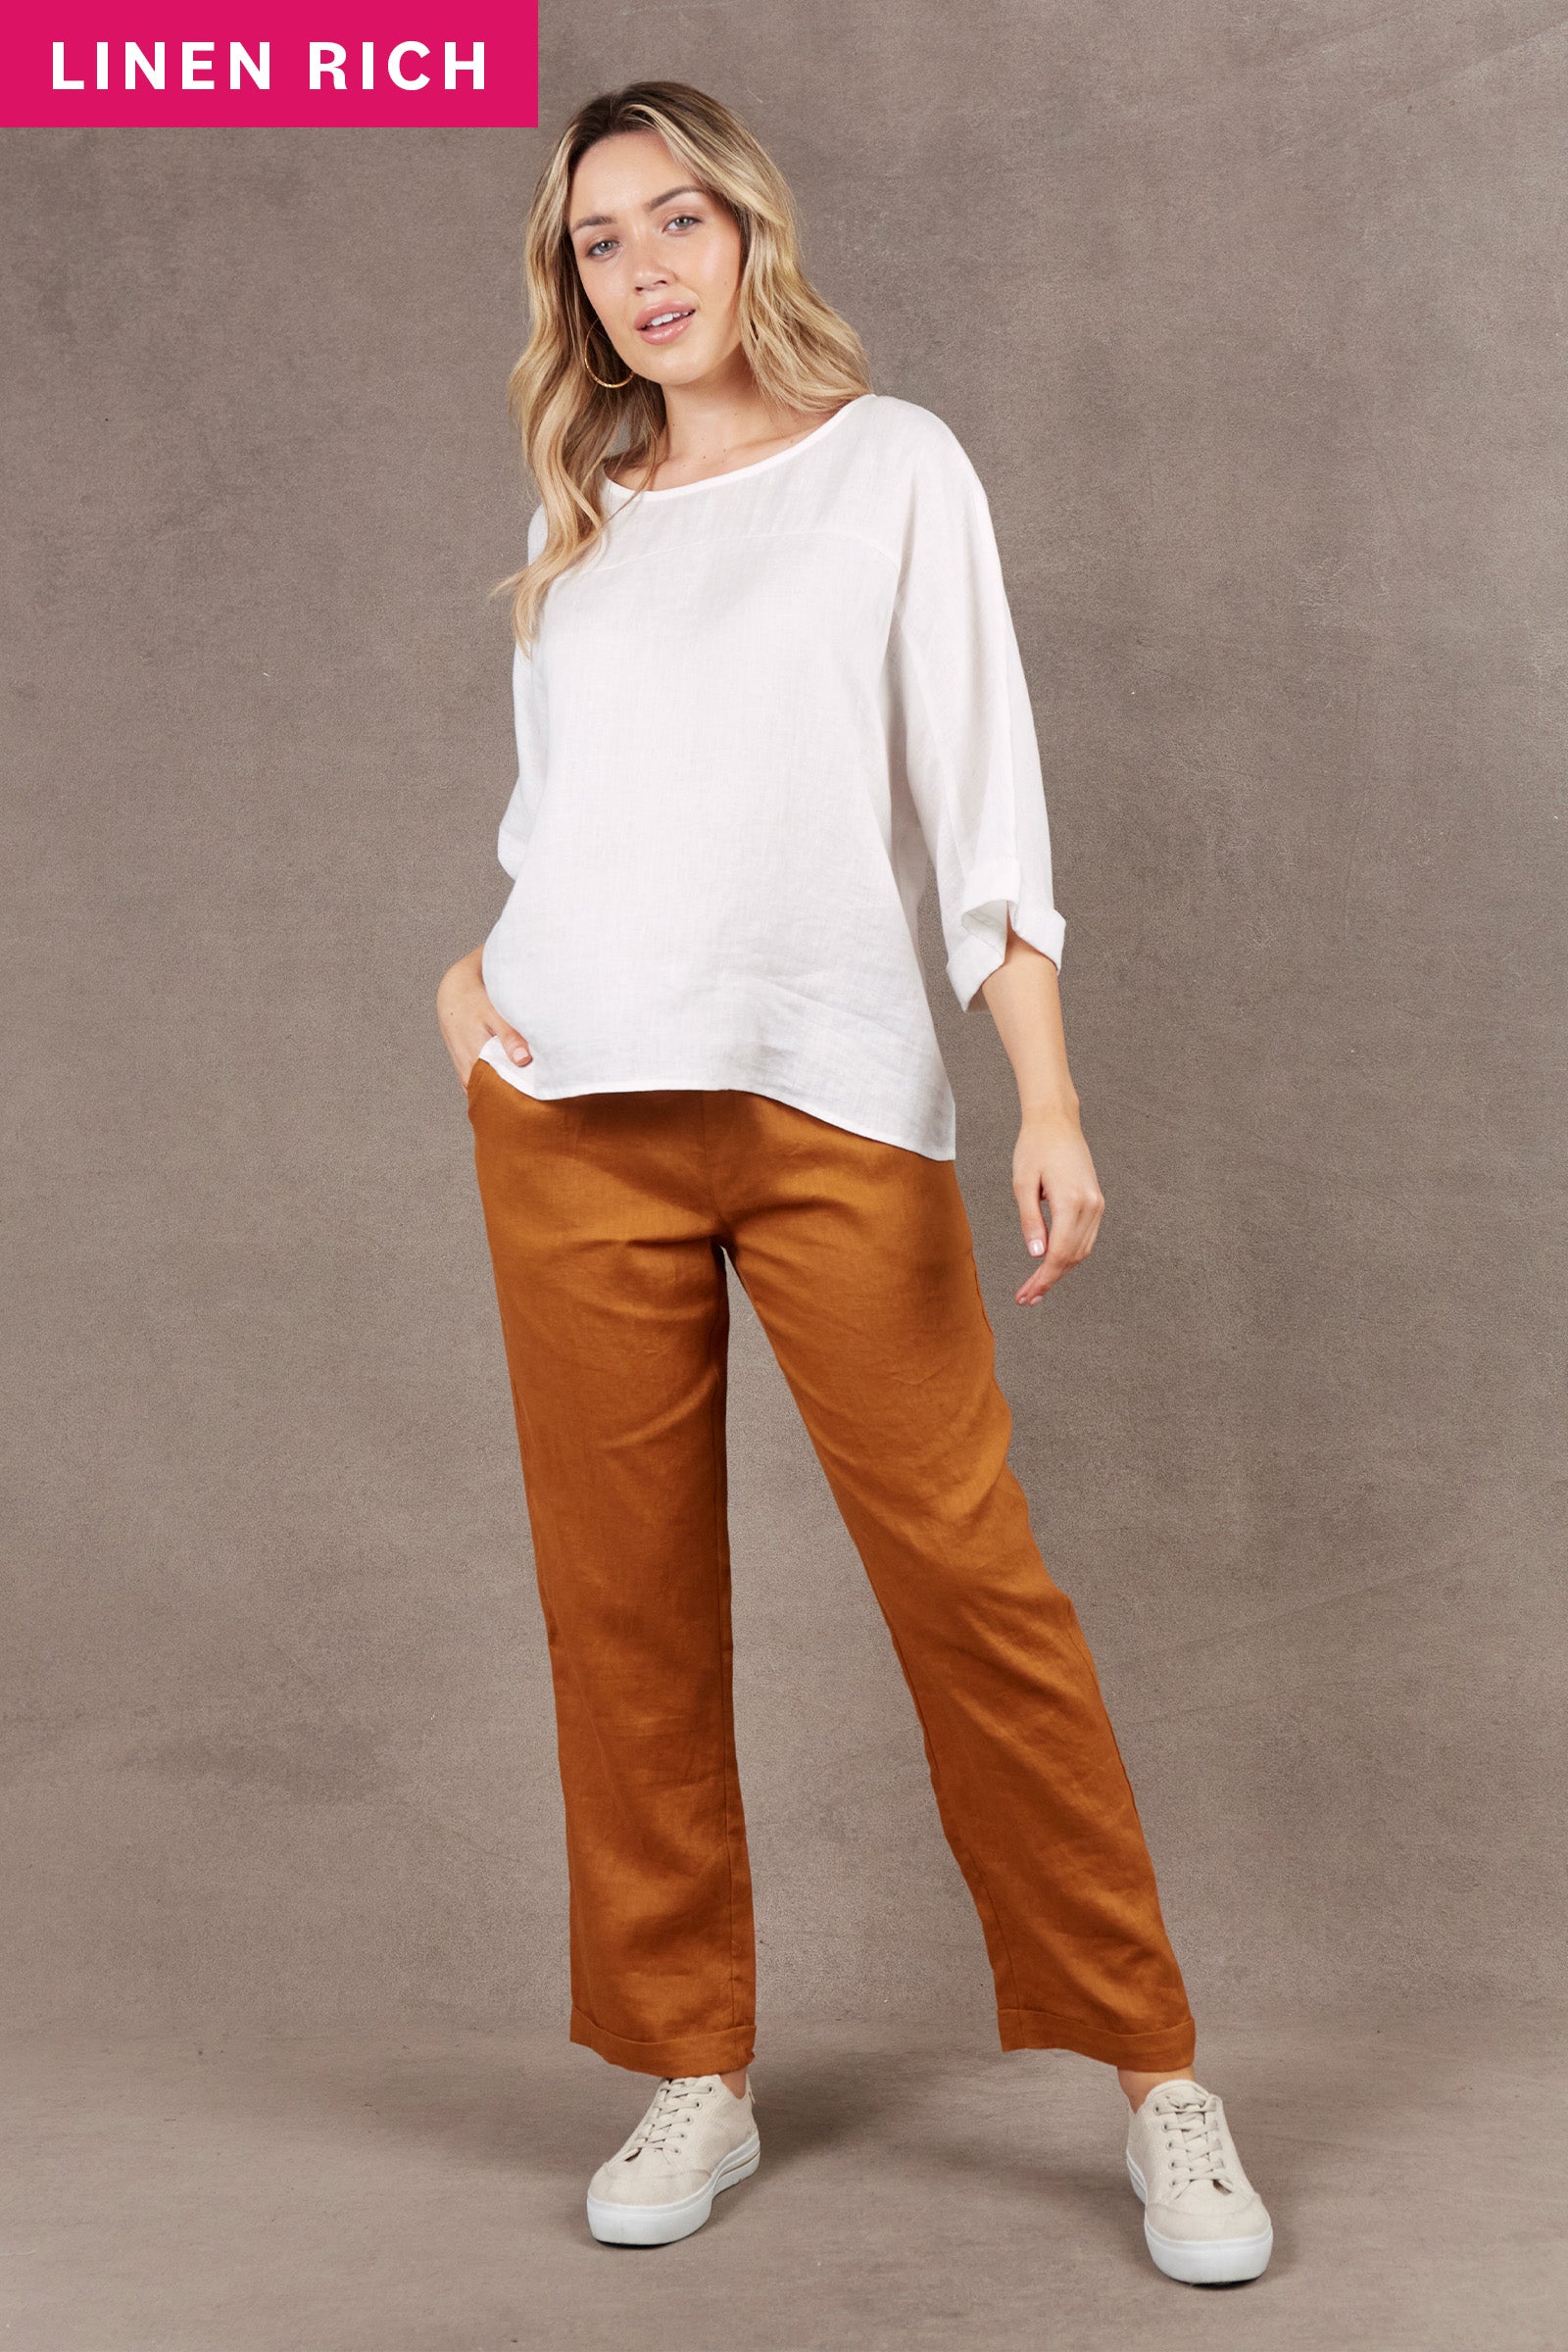 Nama Relax Pant - Ochre - eb&ive Clothing - Pant Relaxed Linen